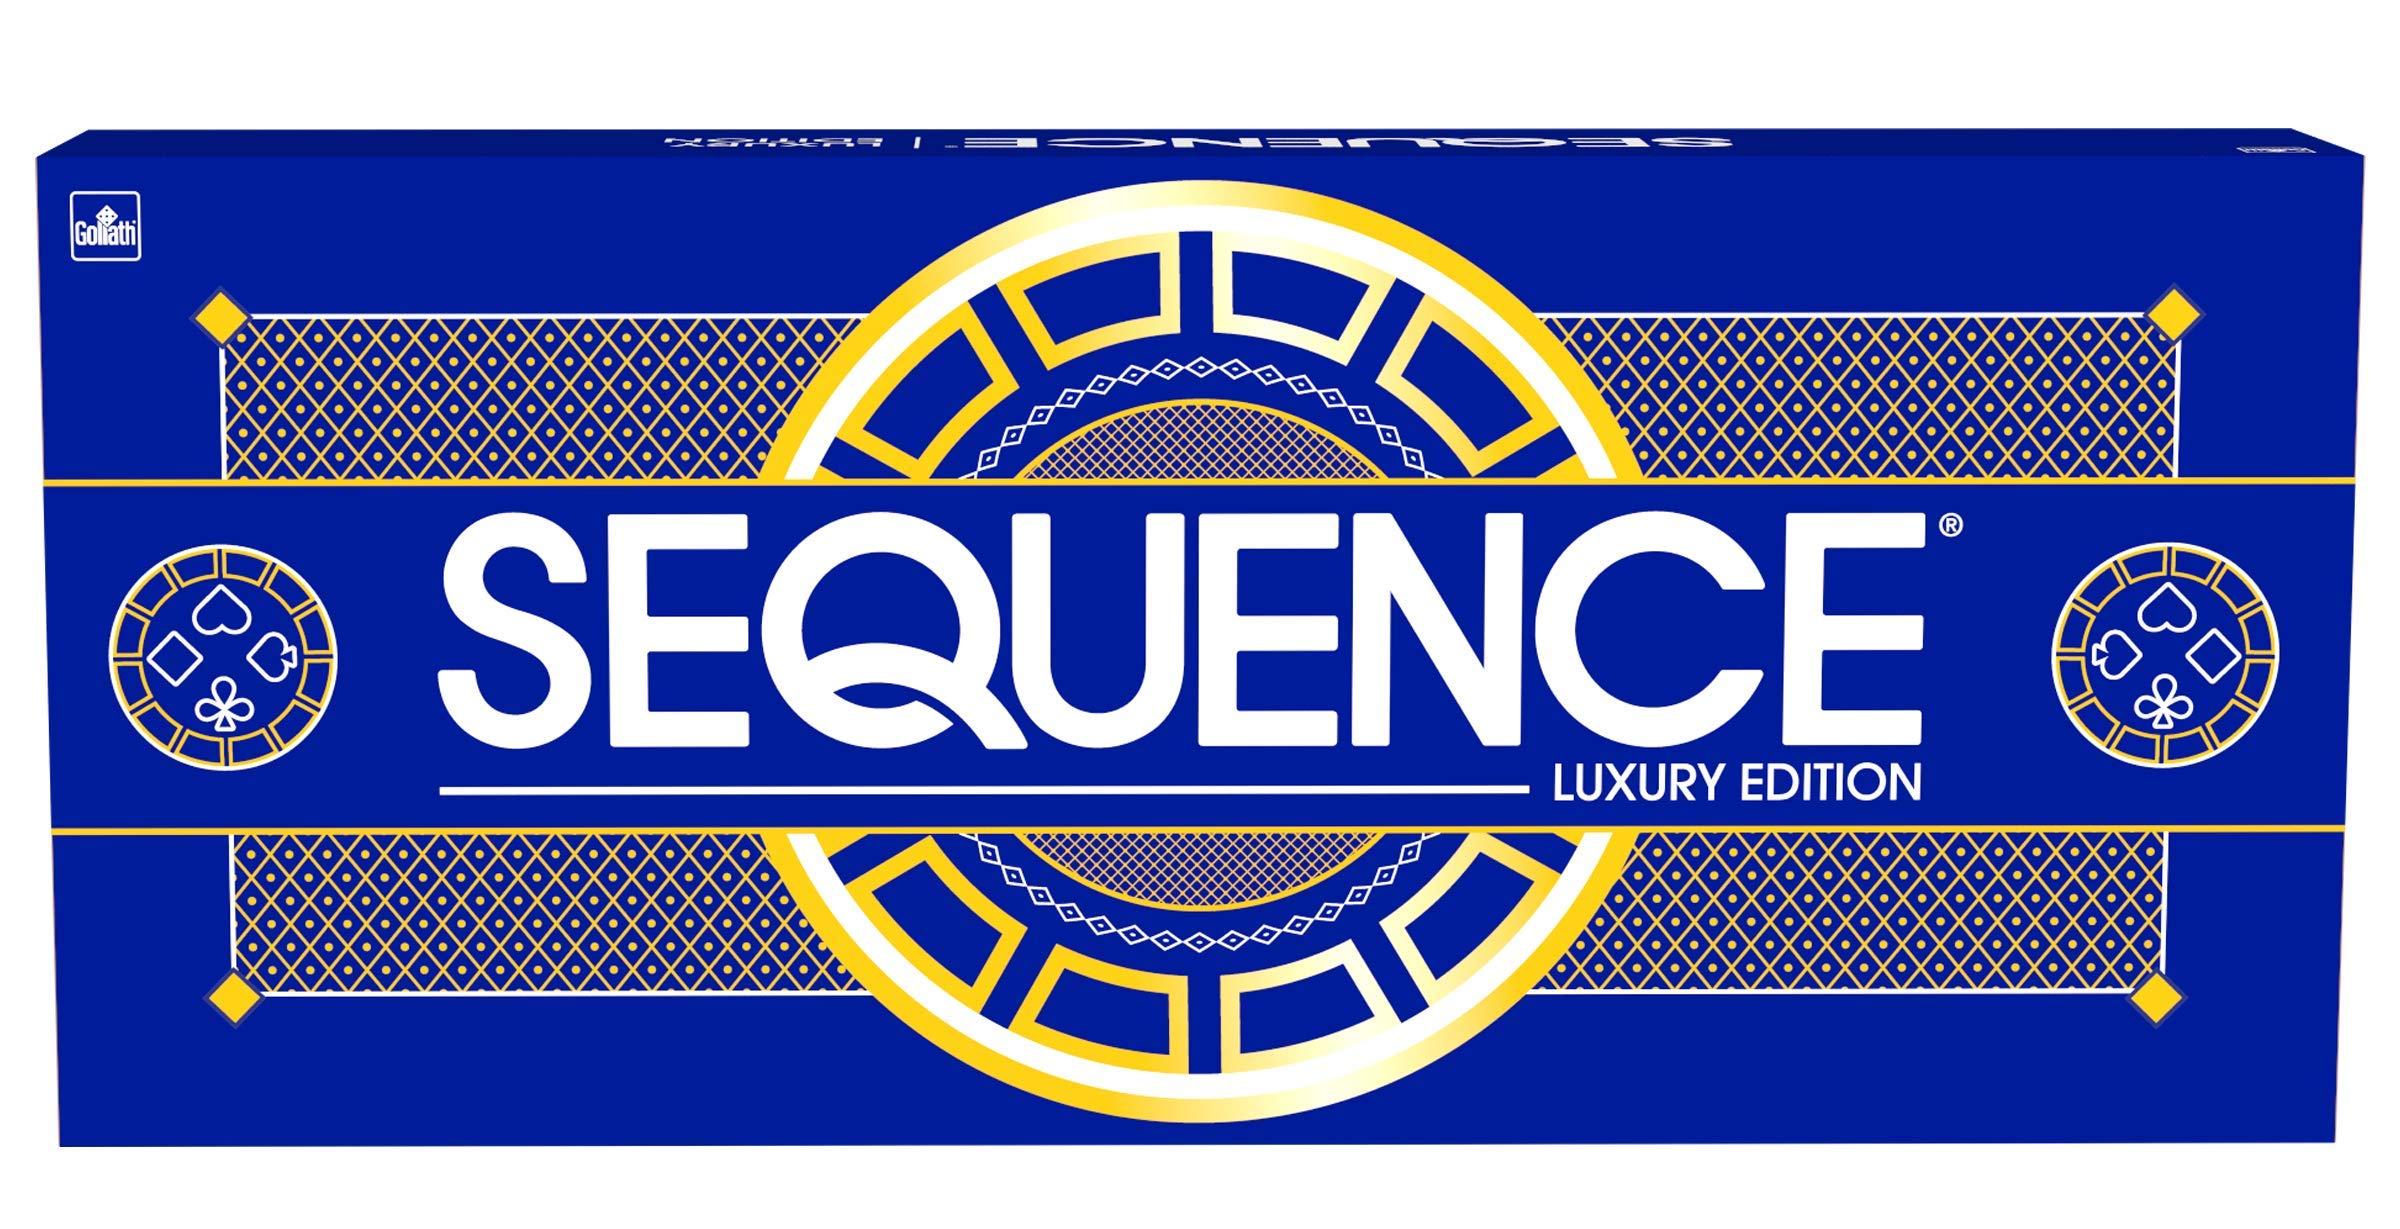 Sequence Luxury Edition - Stunning Set with Deluxe, Cushioned, Roll-Flat Game Mat - Amazon Exclusive by Goliath , Blue, 2-12 players